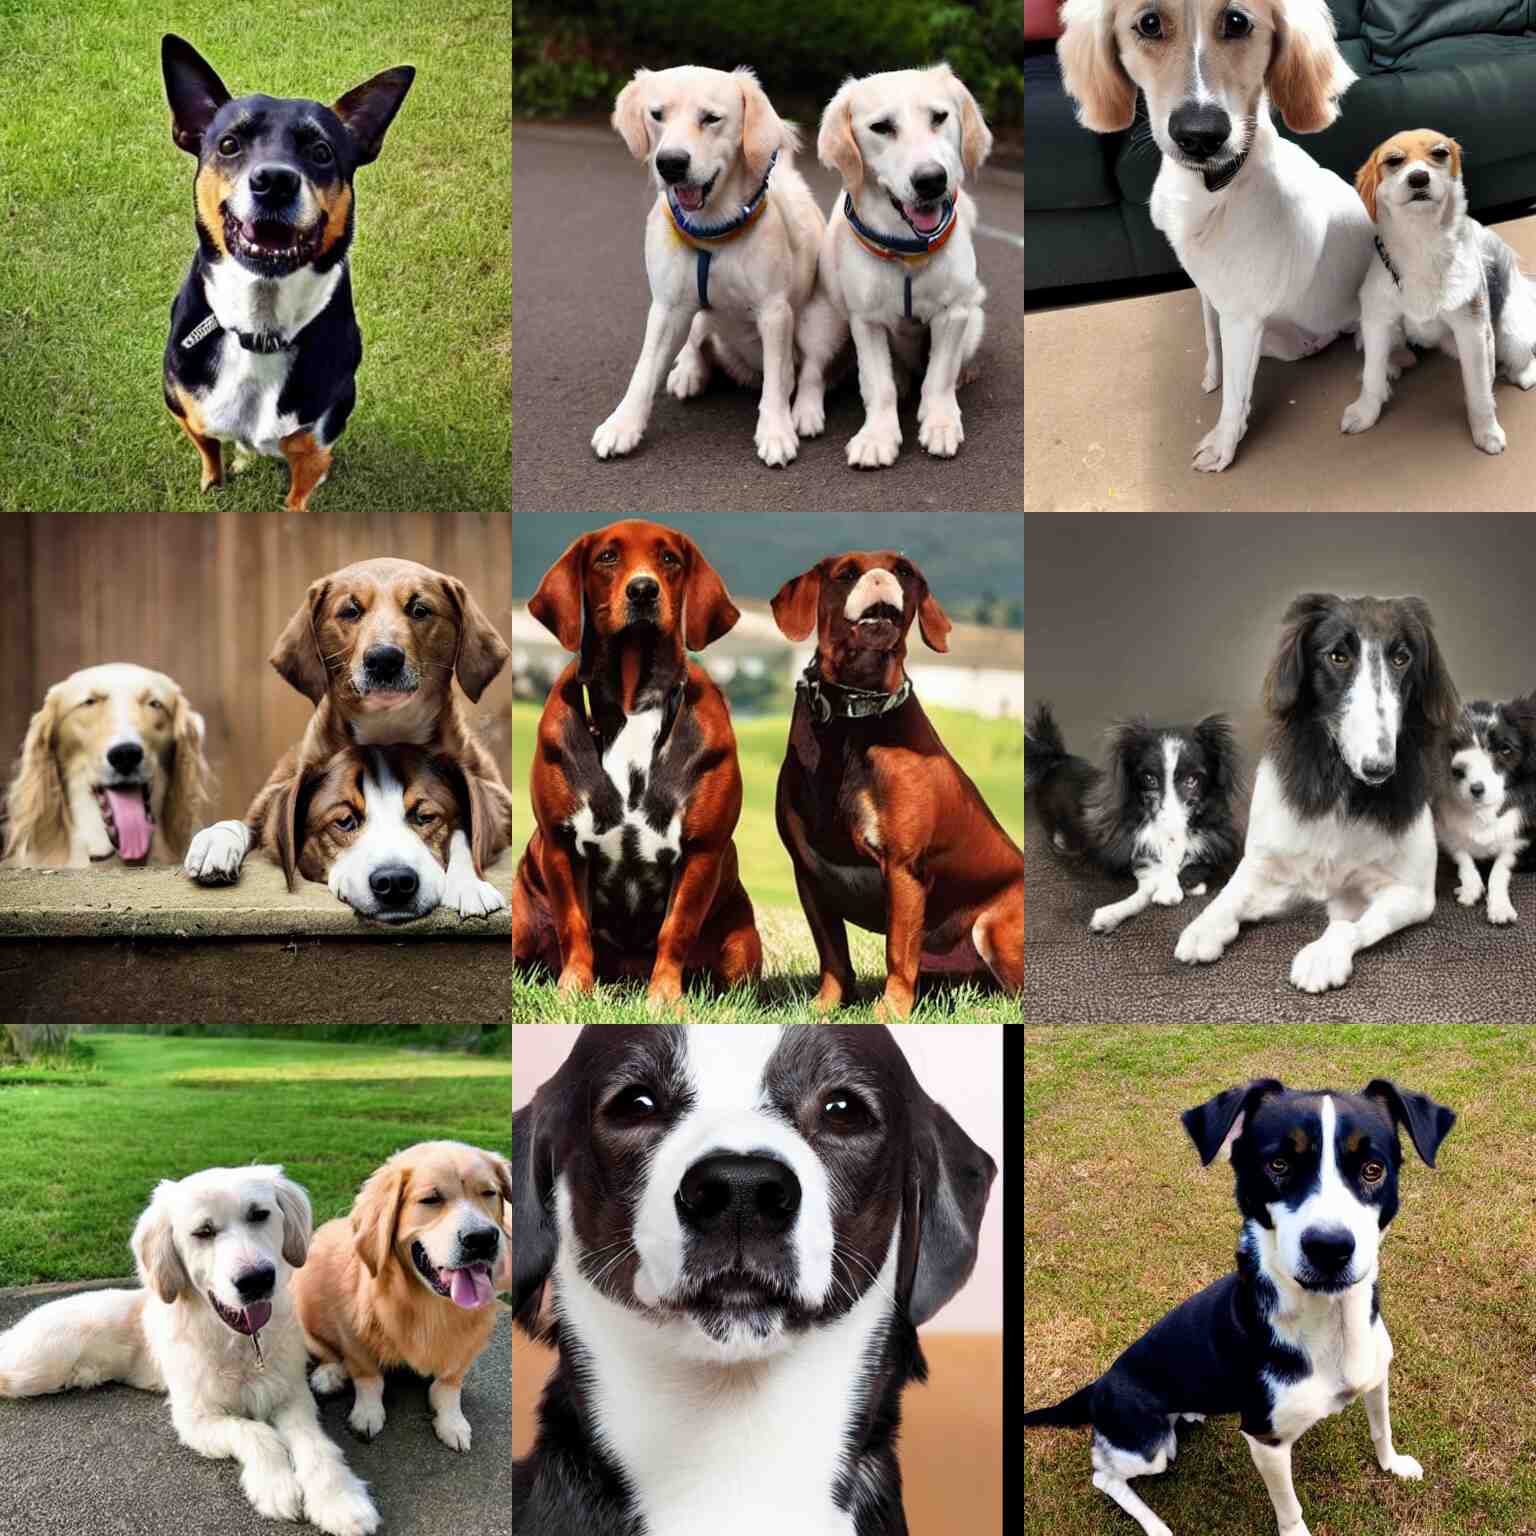 Sort Dogs Images By Breed In Seconds Using This Recognition API